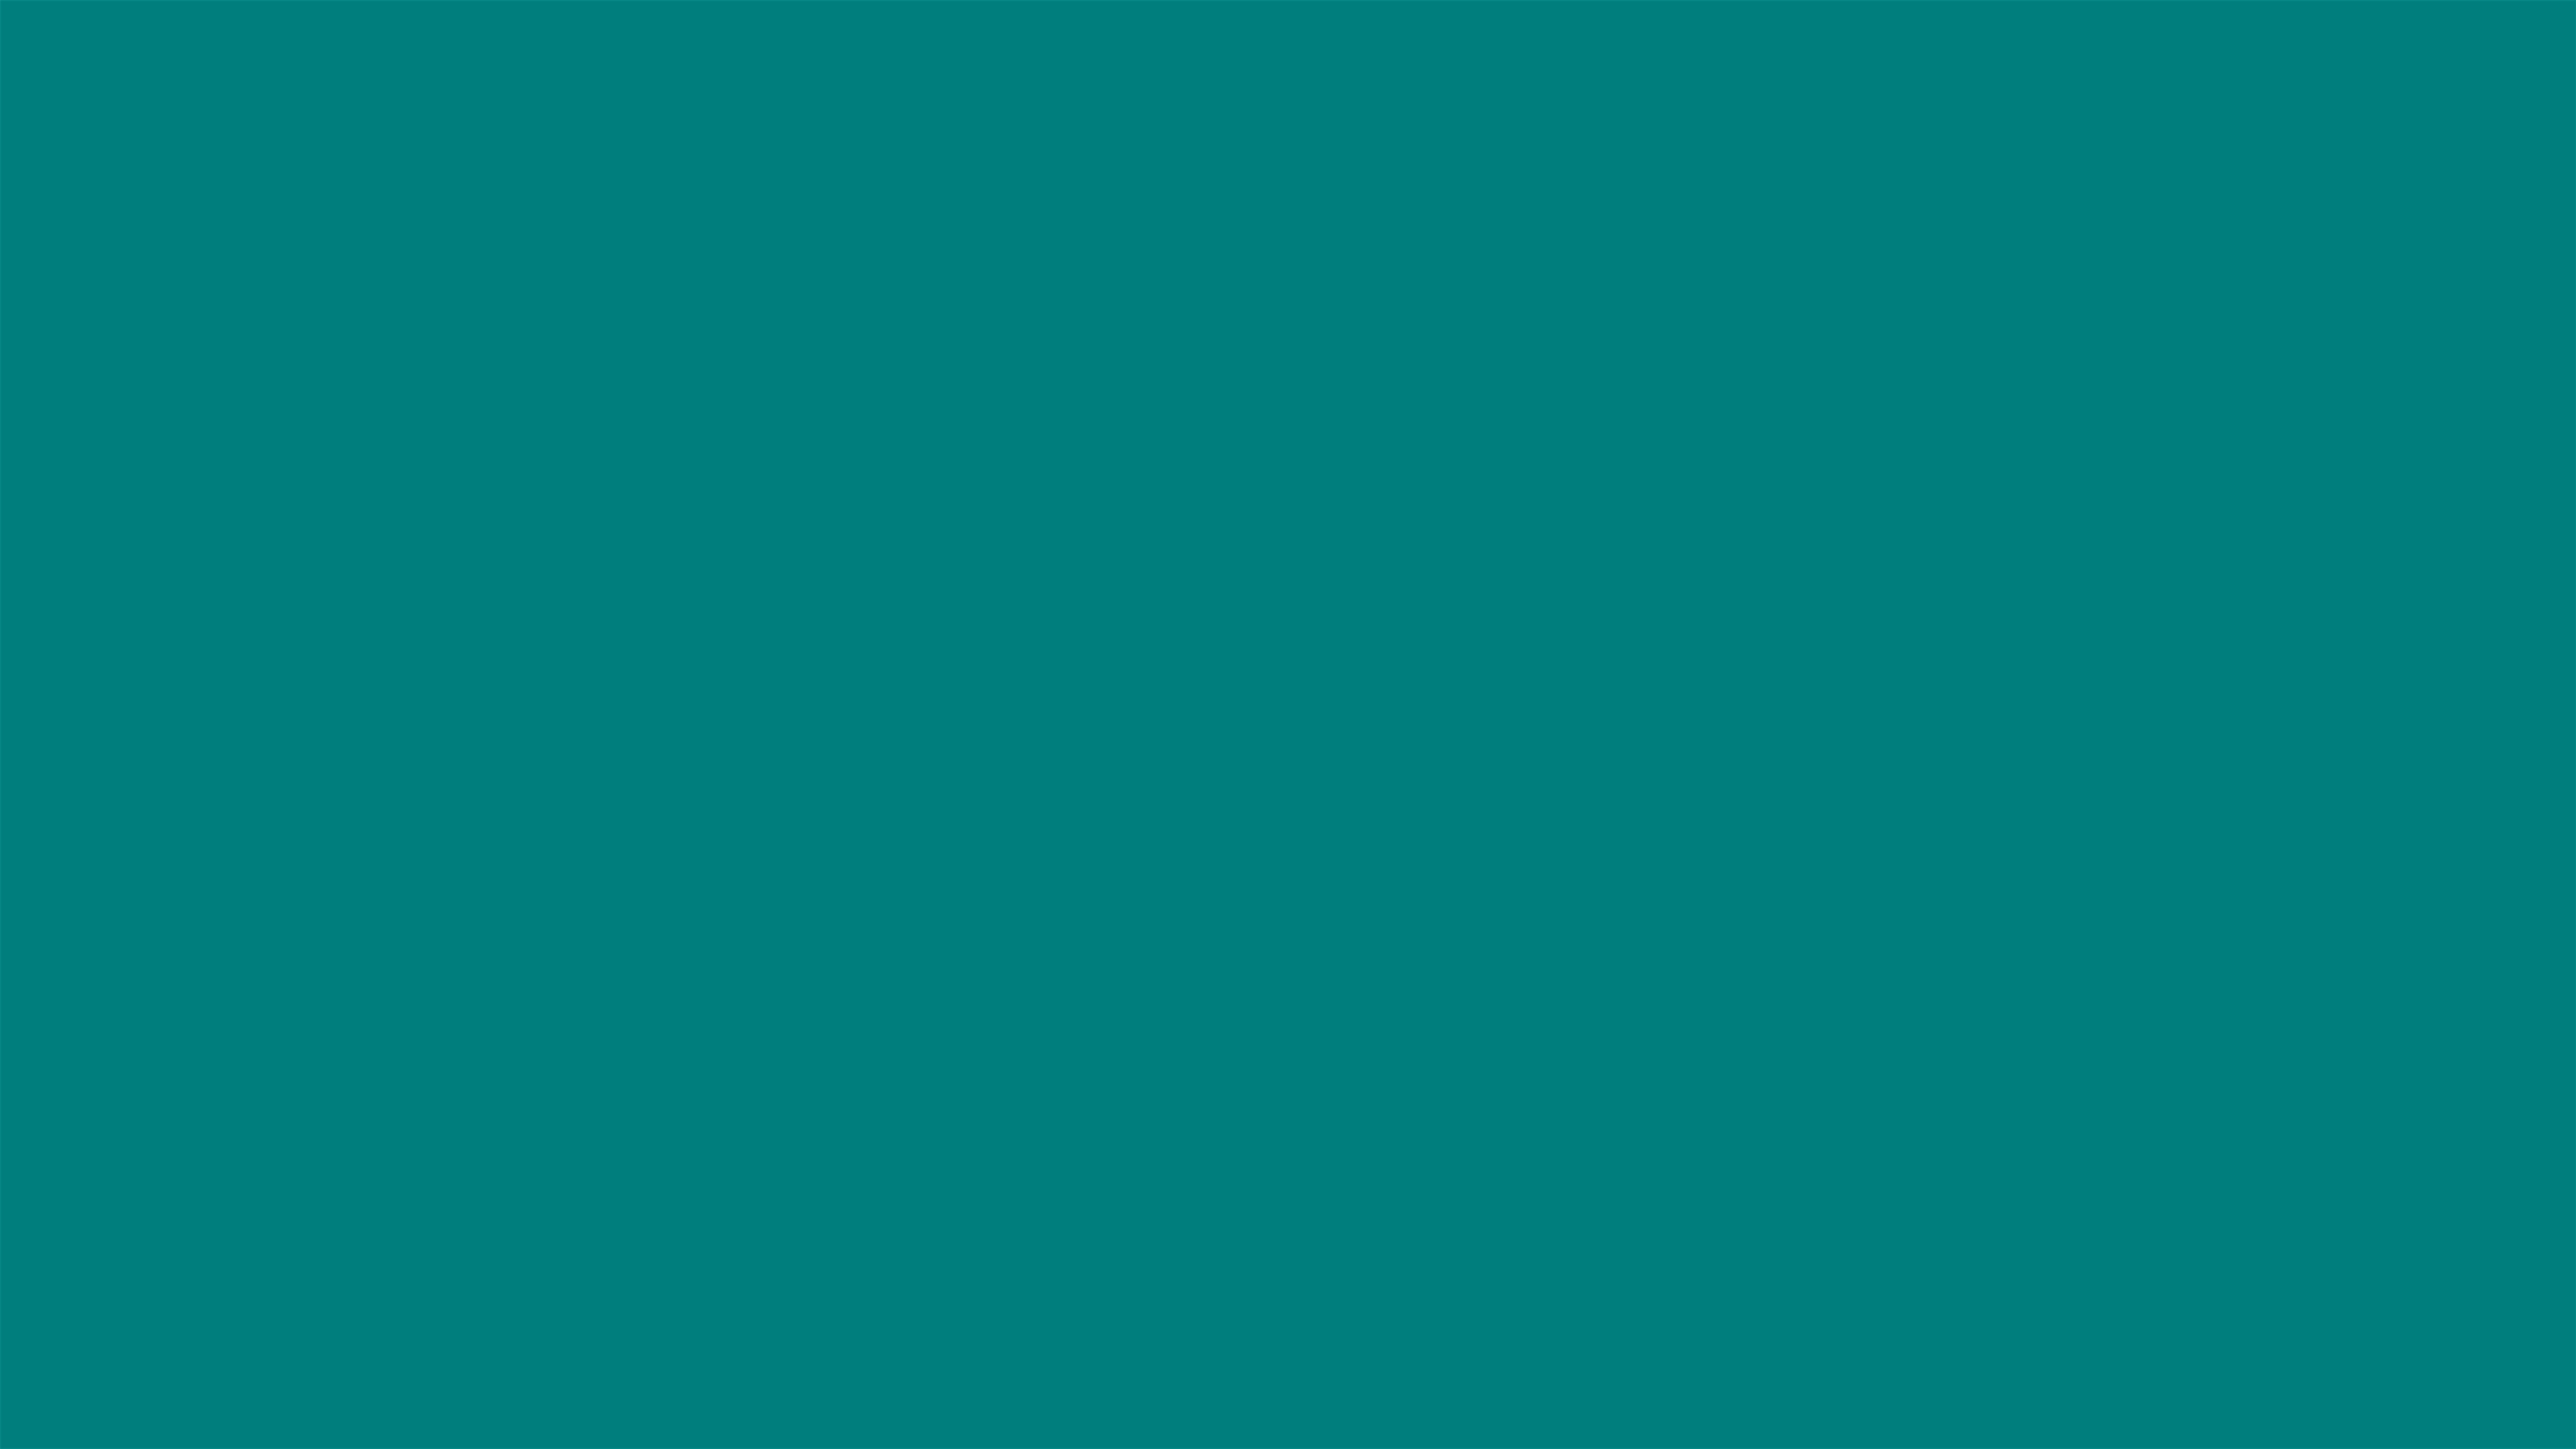 A teal color is shown in this image - Windows 95